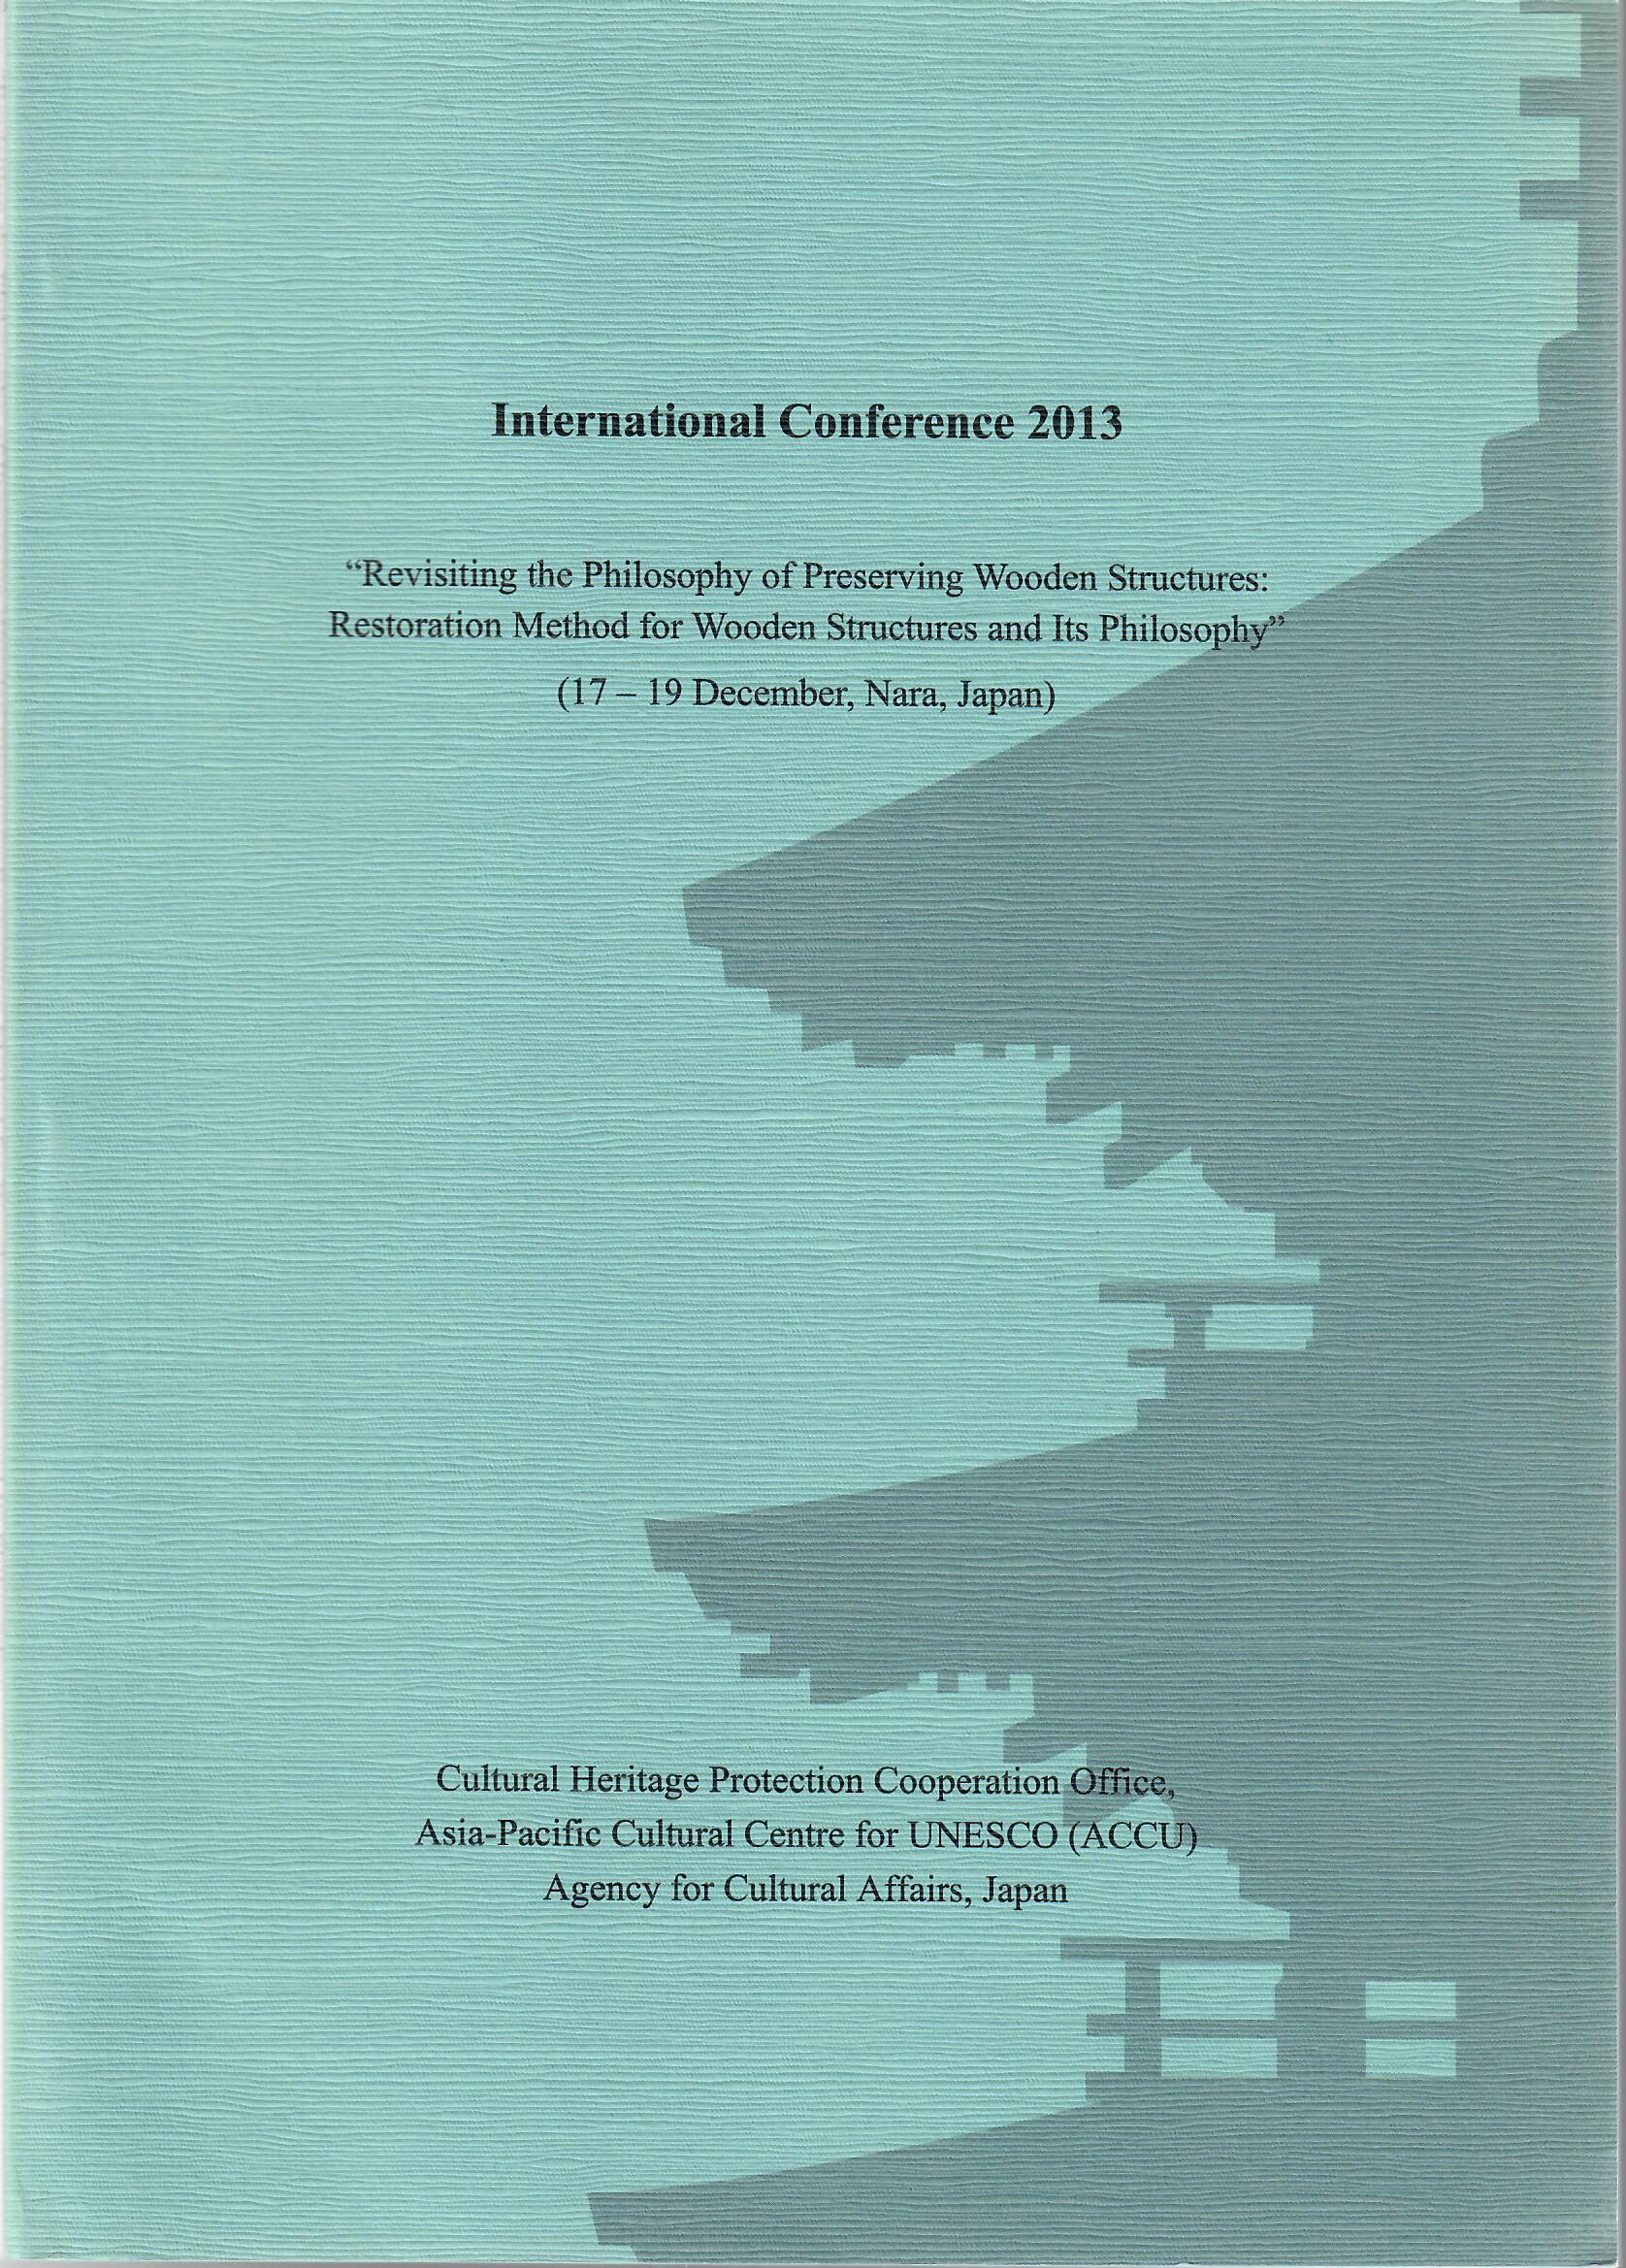 International Conference 2013 “Revisiting the Philosophy of Preserving Wooden Structures: Restoration Method for Wooden Structures and Its Philosophy”